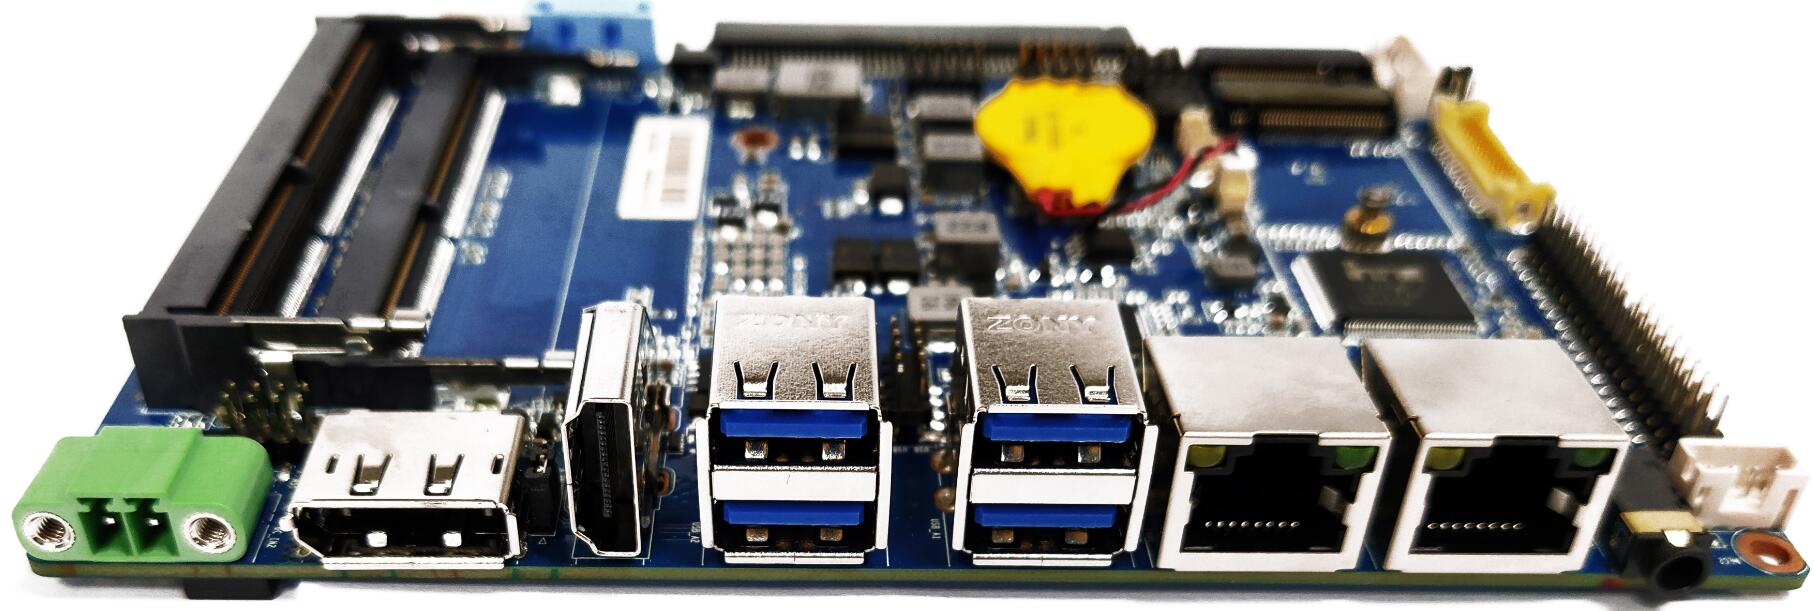  3.5inch Industrial Fanless Motherboard With 8th Gen CPU